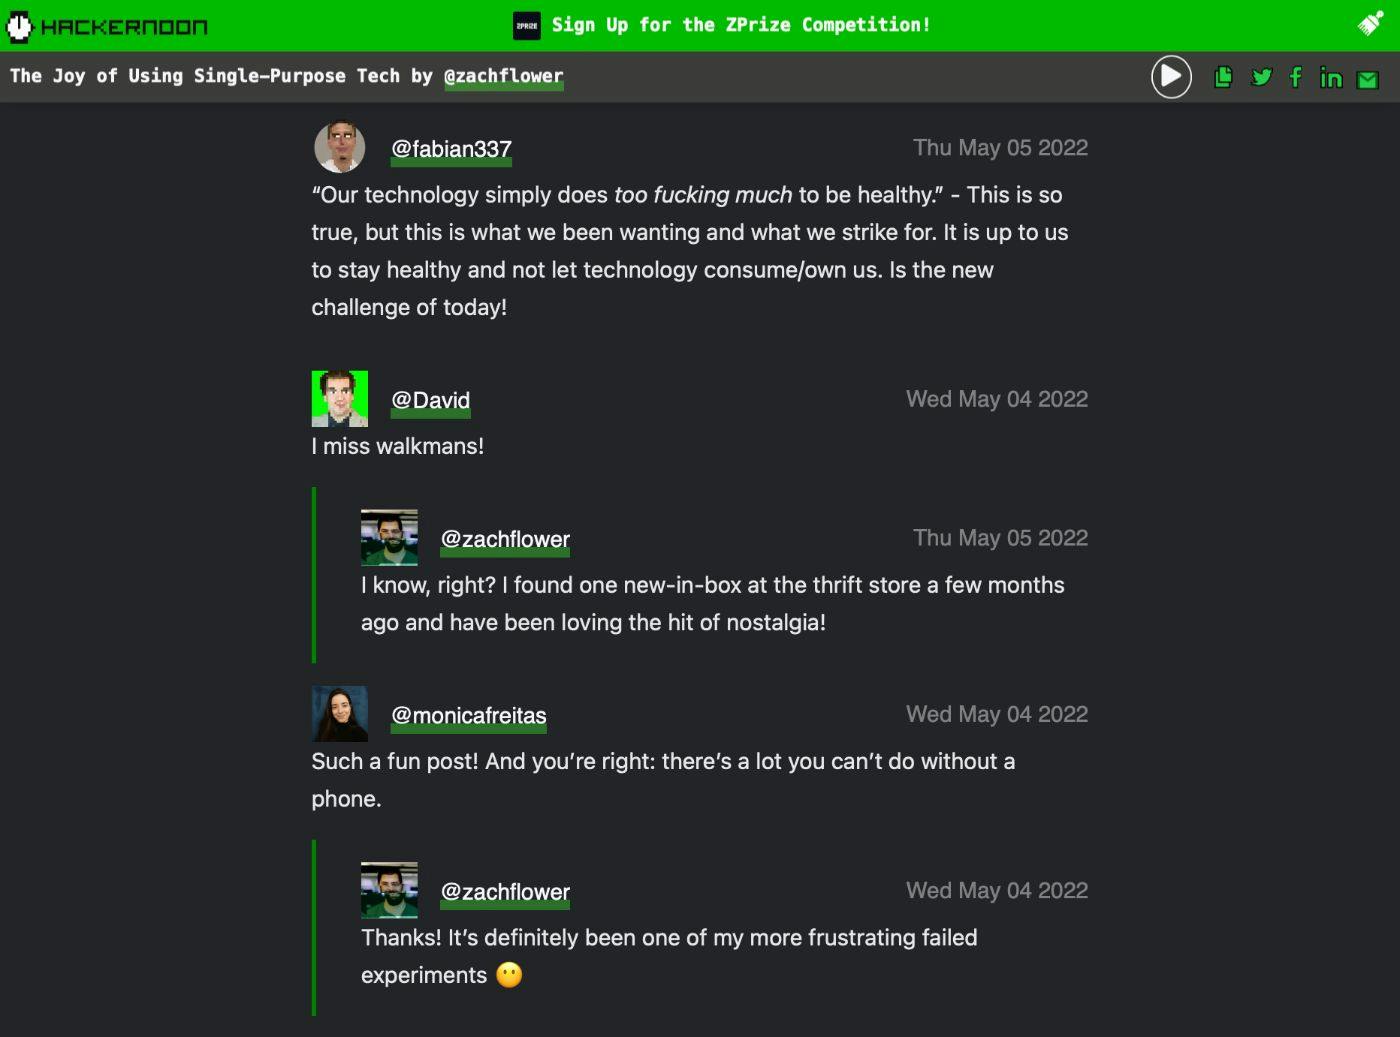 featured image - How Do Comments Work on HackerNoon?